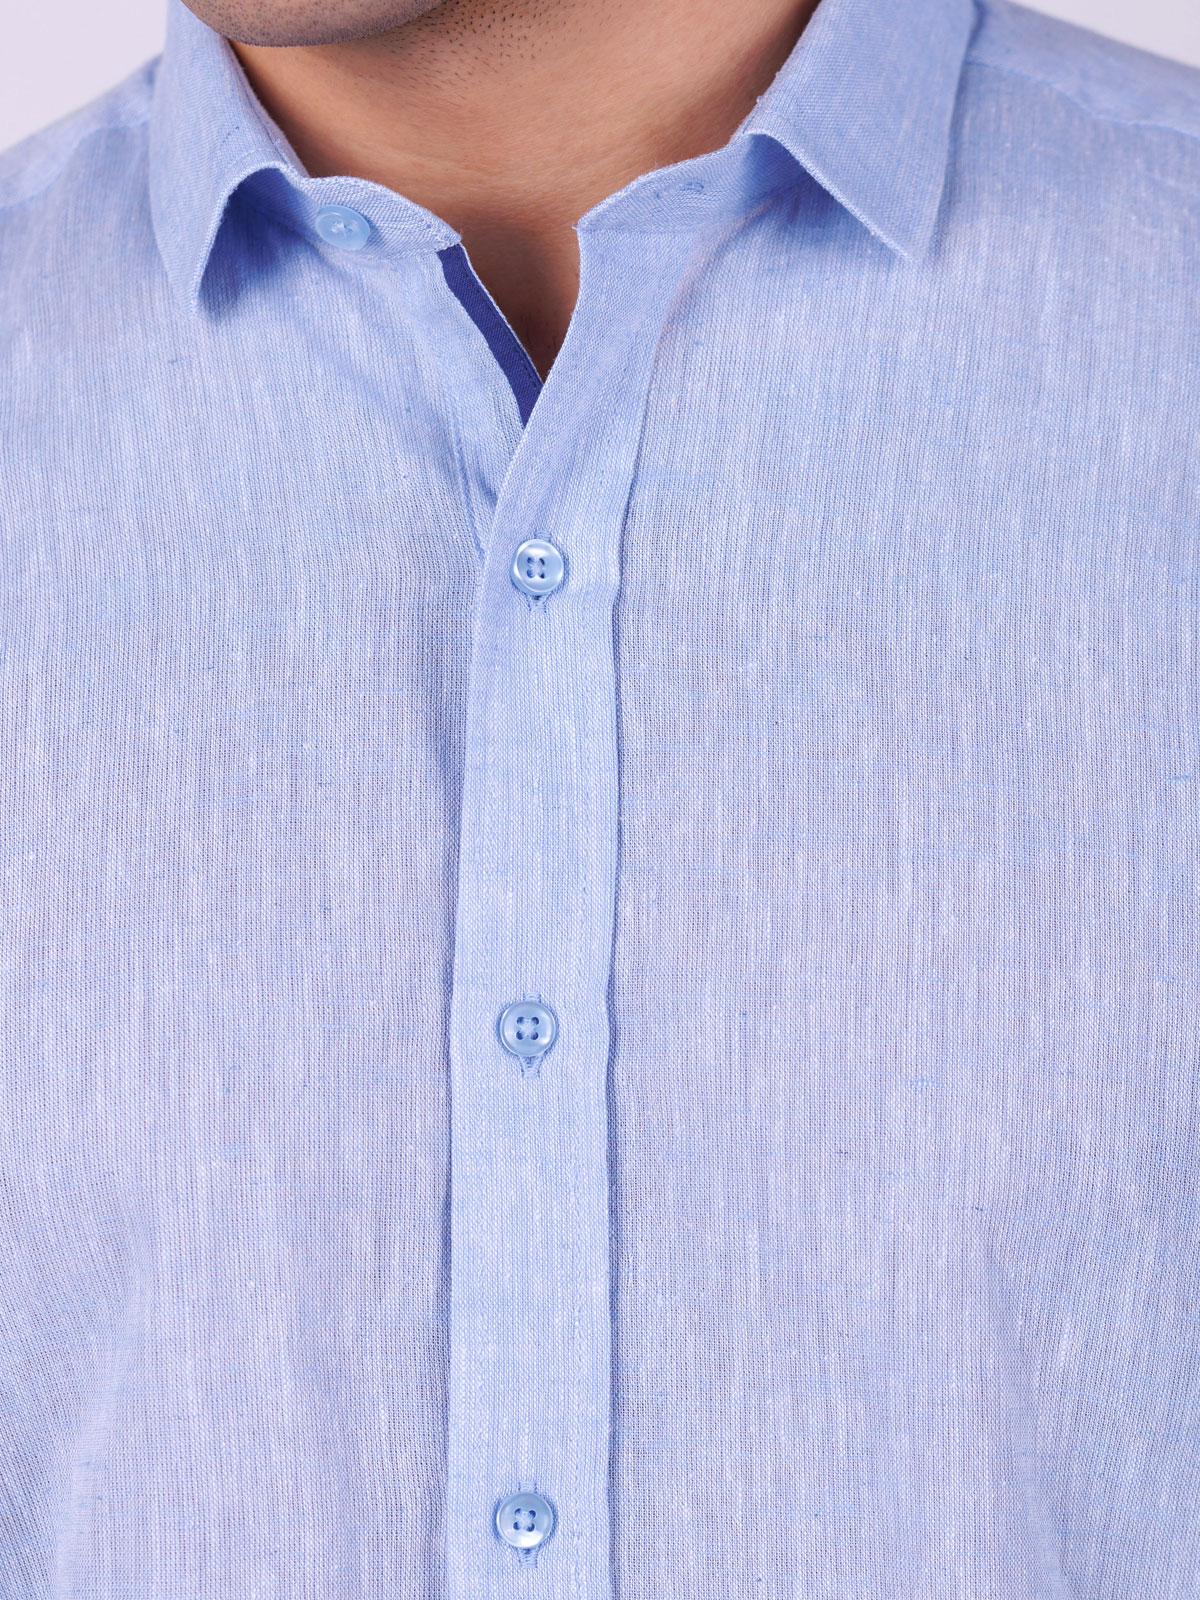 Linen and cotton shirt in light blue - 21528 € 49.49 img2